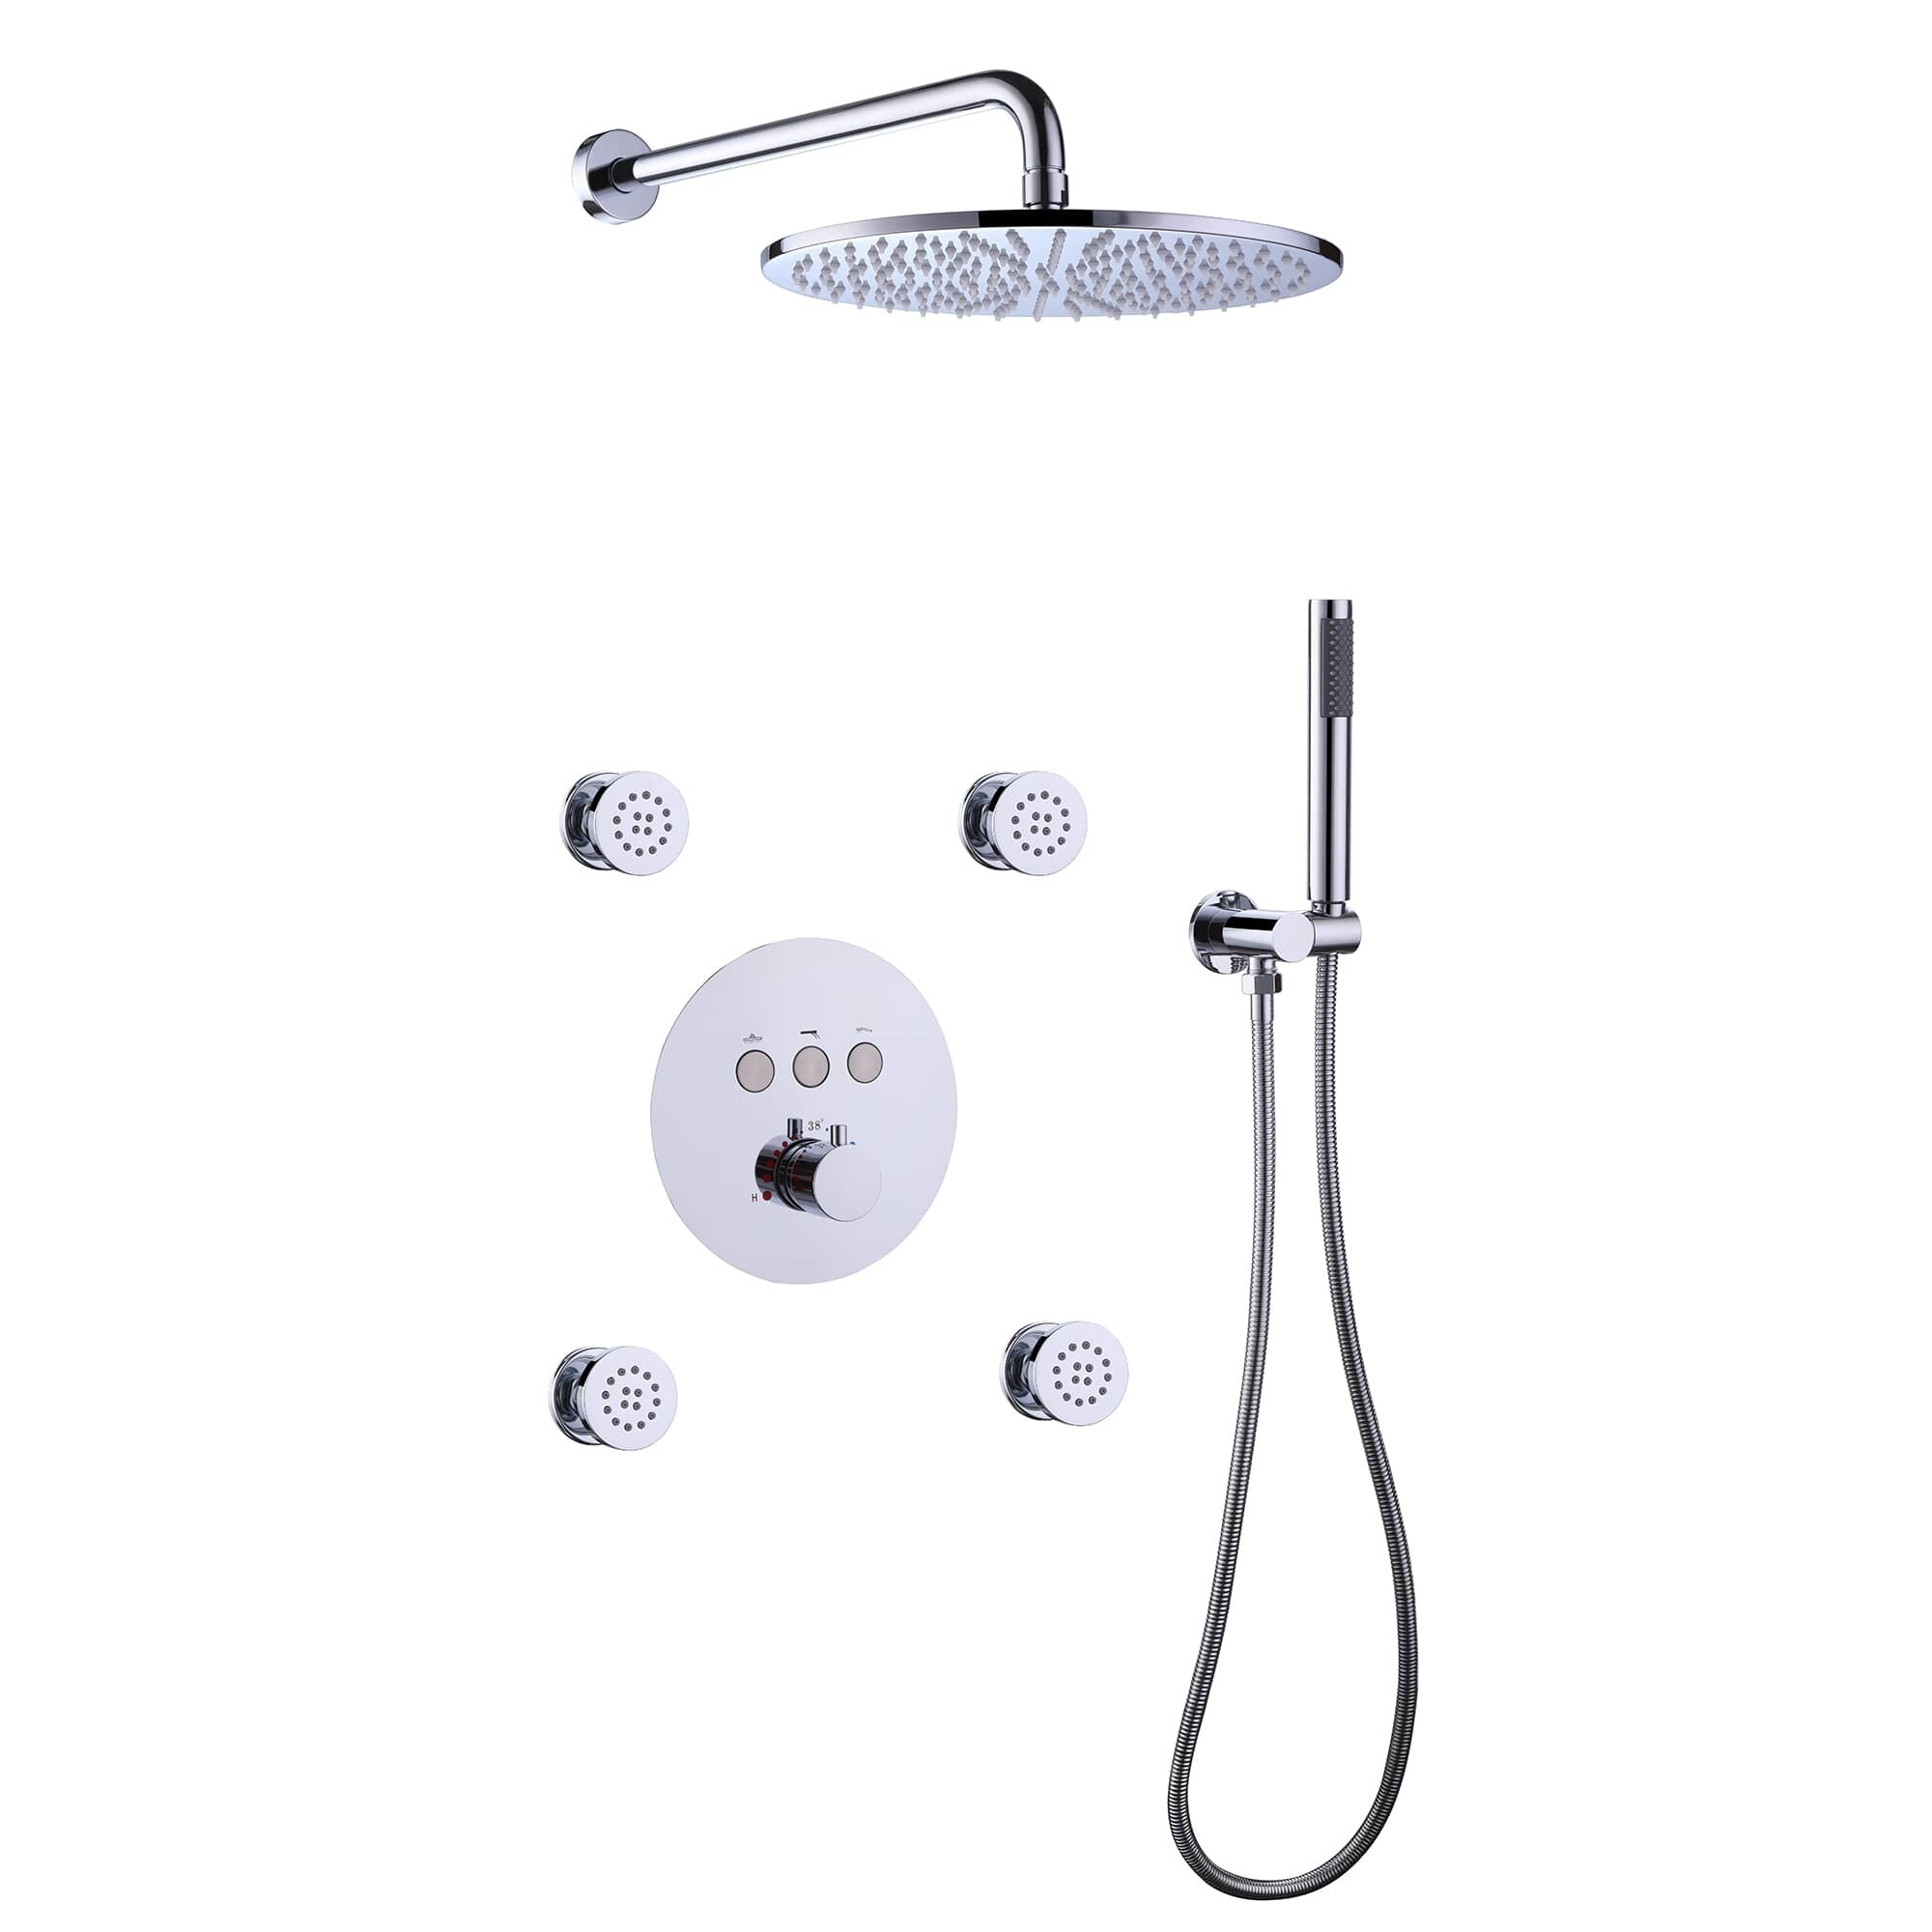 https://ak1.ostkcdn.com/images/products/is/images/direct/7c0ecc013a8b2a5703bc75132e3a2183dbb8b478/Thermostatic-Shower-System-With-Rough-in-Valve-Wall-Mount-Shower-Faucet-With-Body-Jet-And-Hand-Shower-12-Inch-Shower-Head-Set.jpg